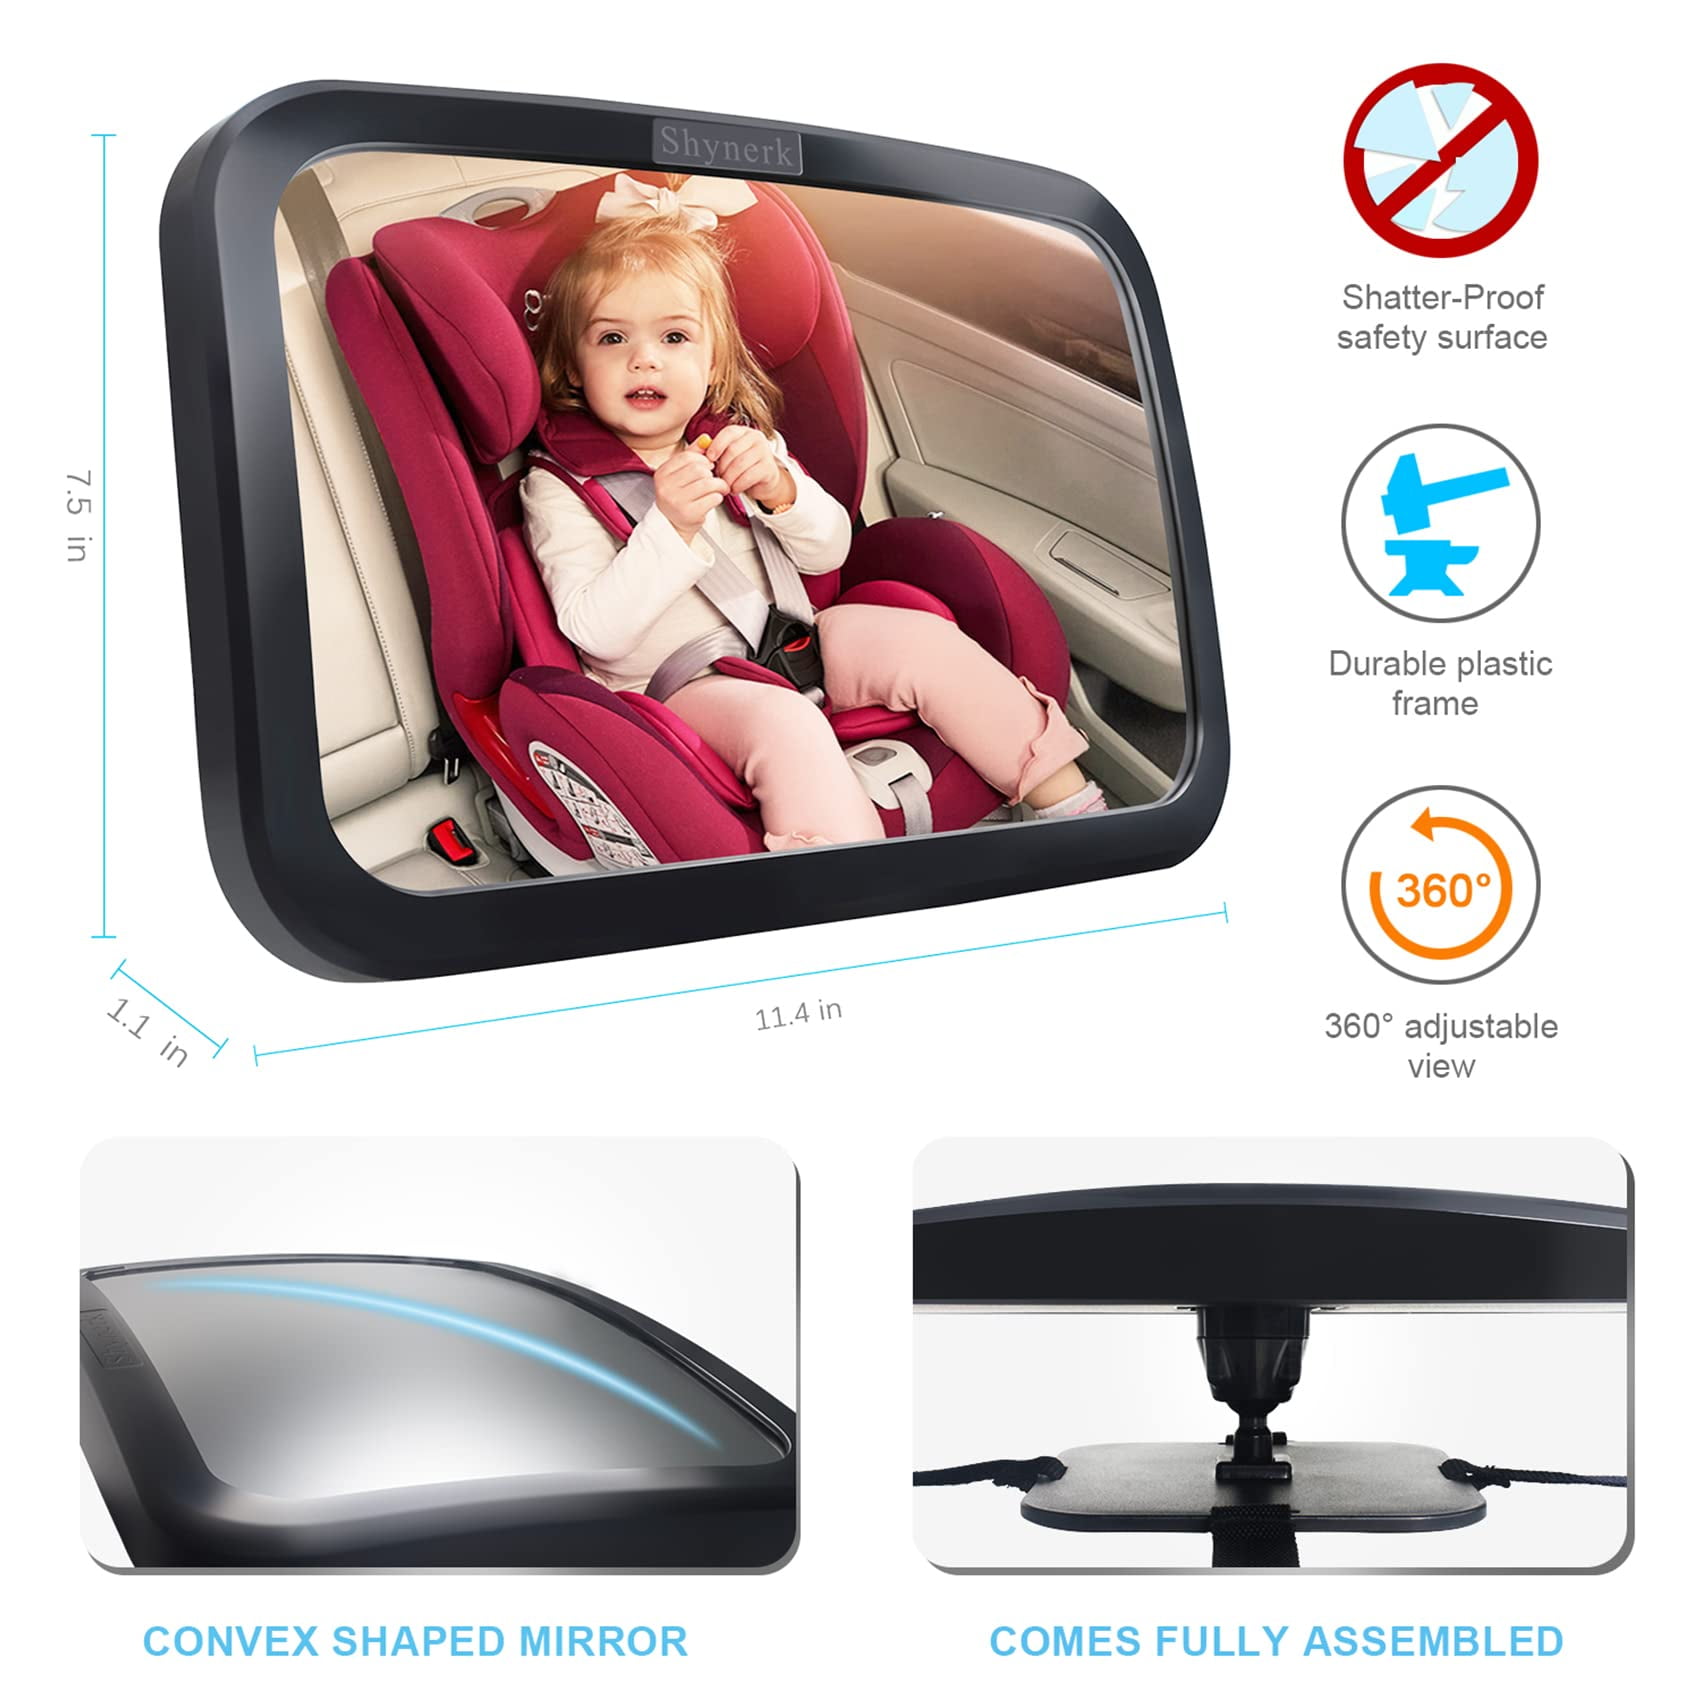  JoyDow Baby Car Mirror with Night Light, Safety Rear Facing Car  Seat Mirror for Infant Newborn, Wide Crystal Clear View 360° Adjustable,  Crash Tested & Shatterproof, Soft Night Light : Baby